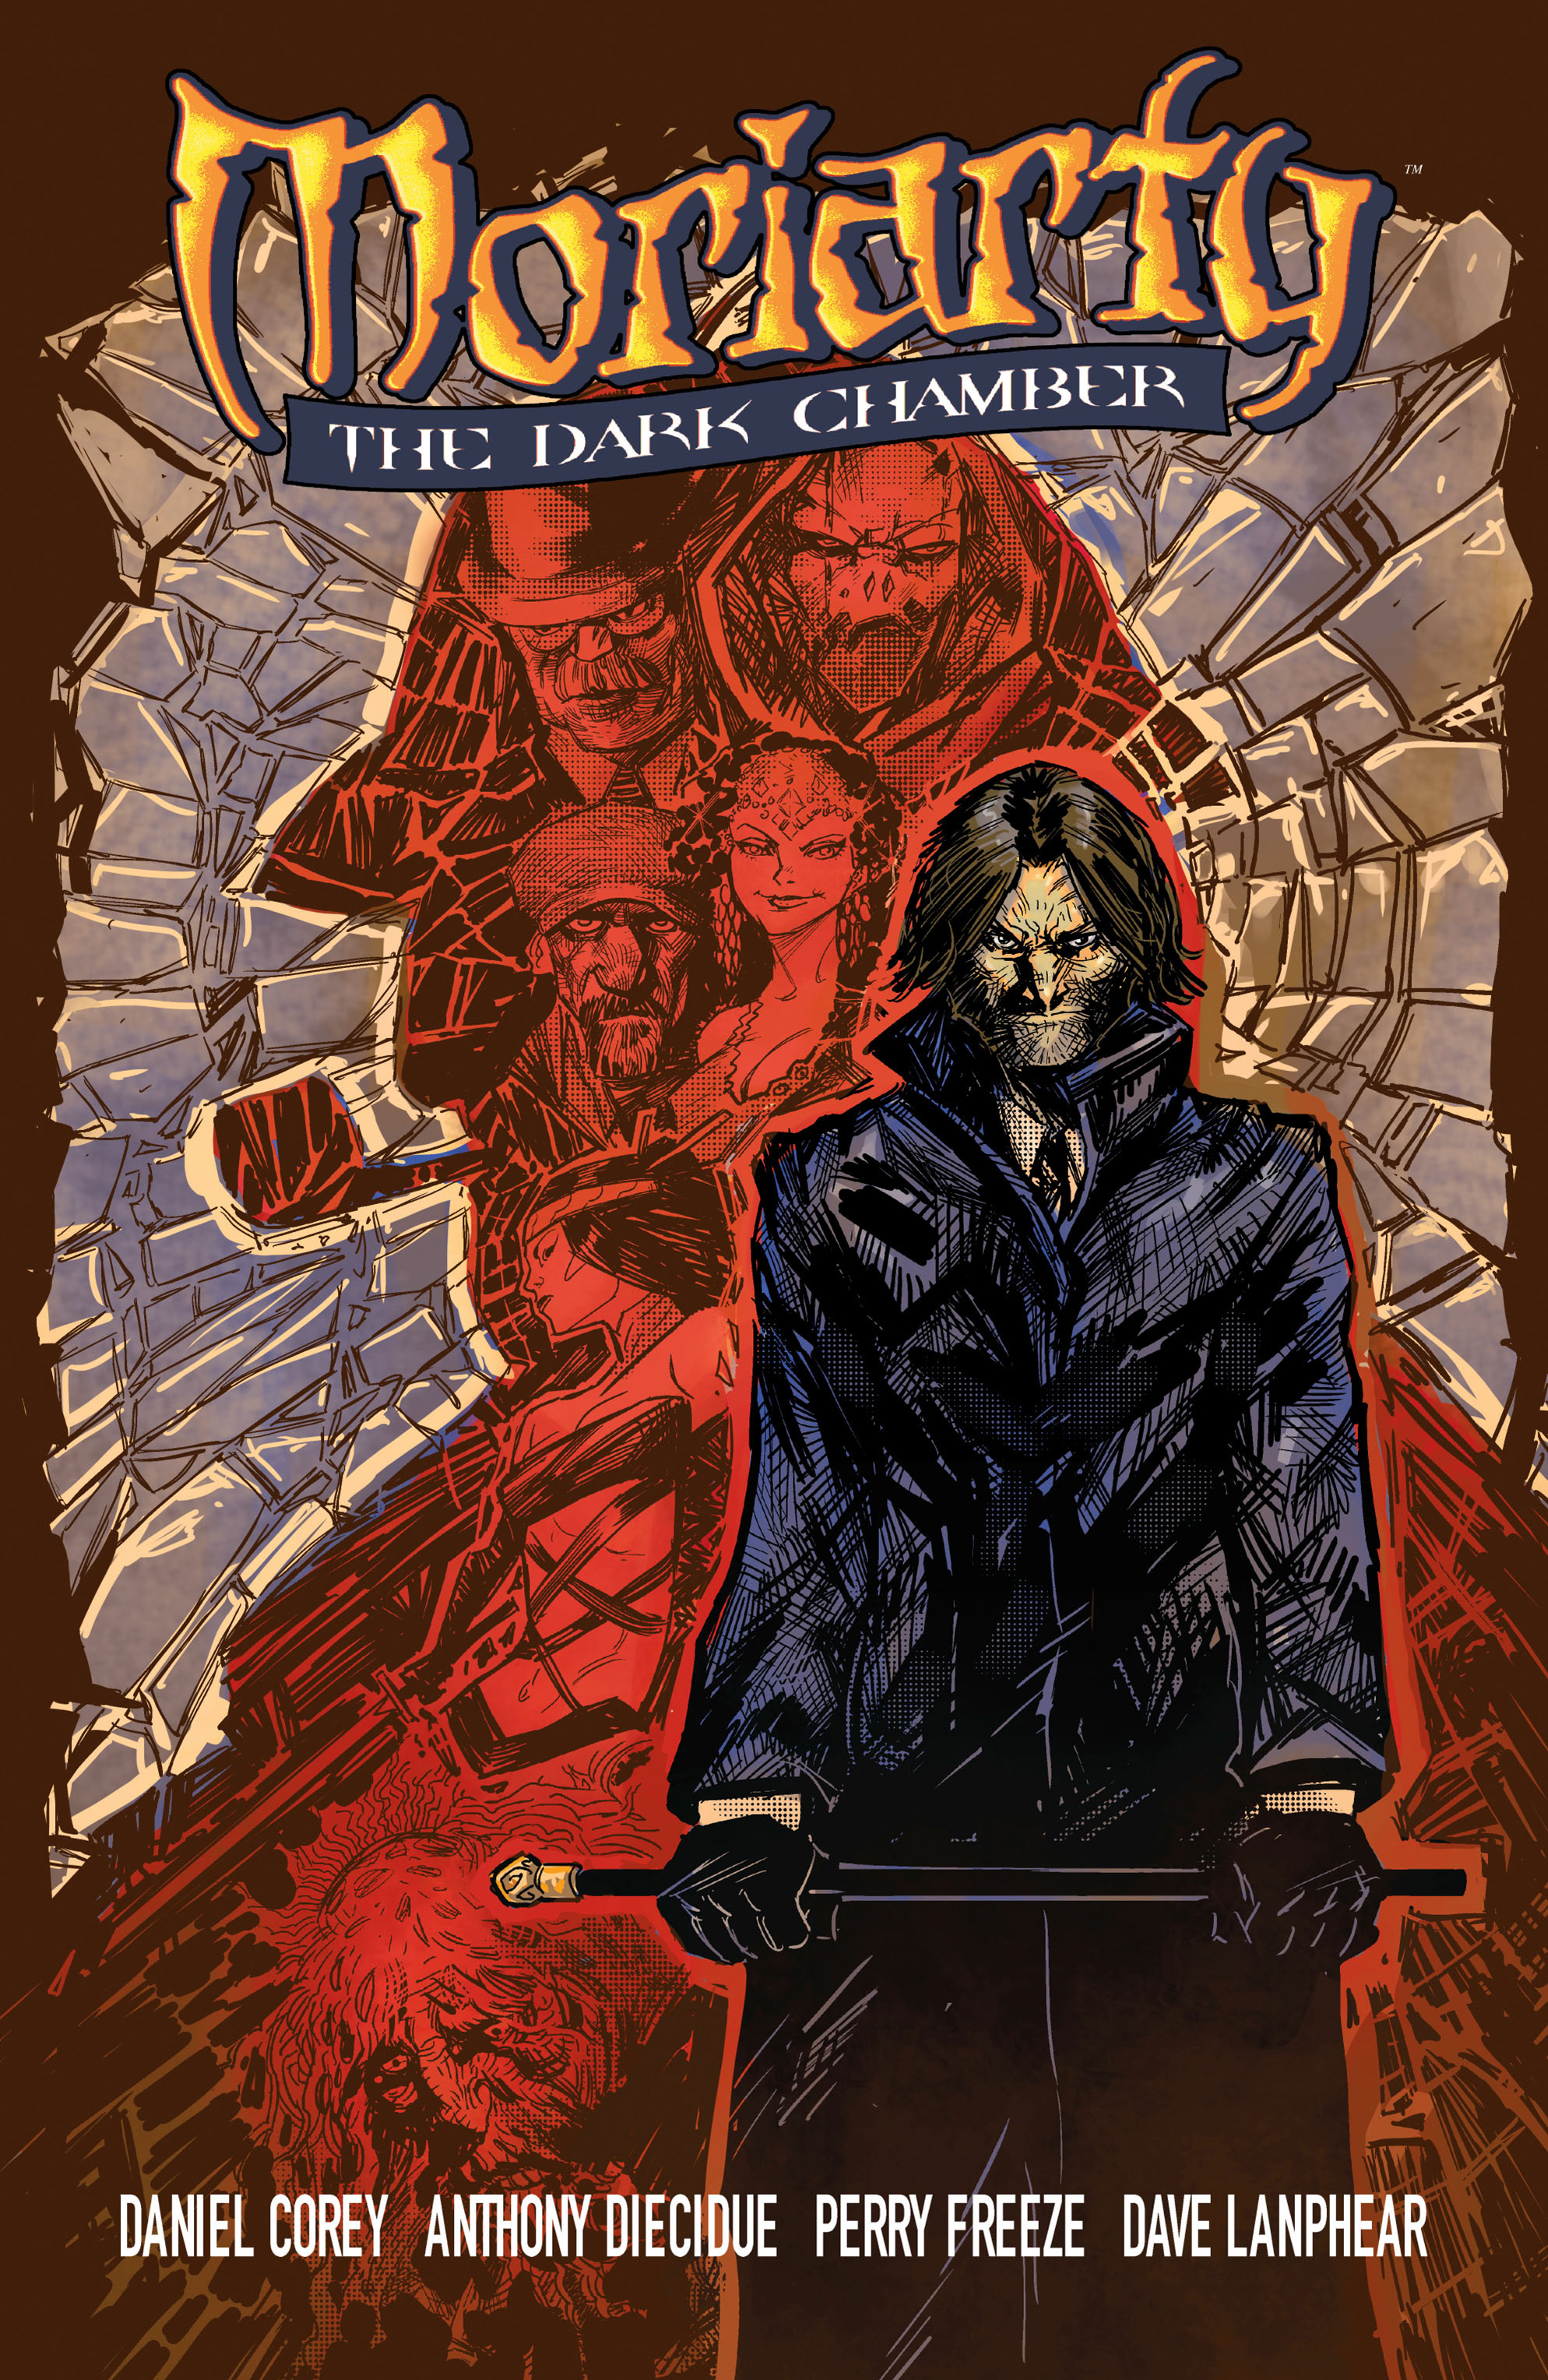 Read online Moriarty comic -  Issue # TPB 1 - 1